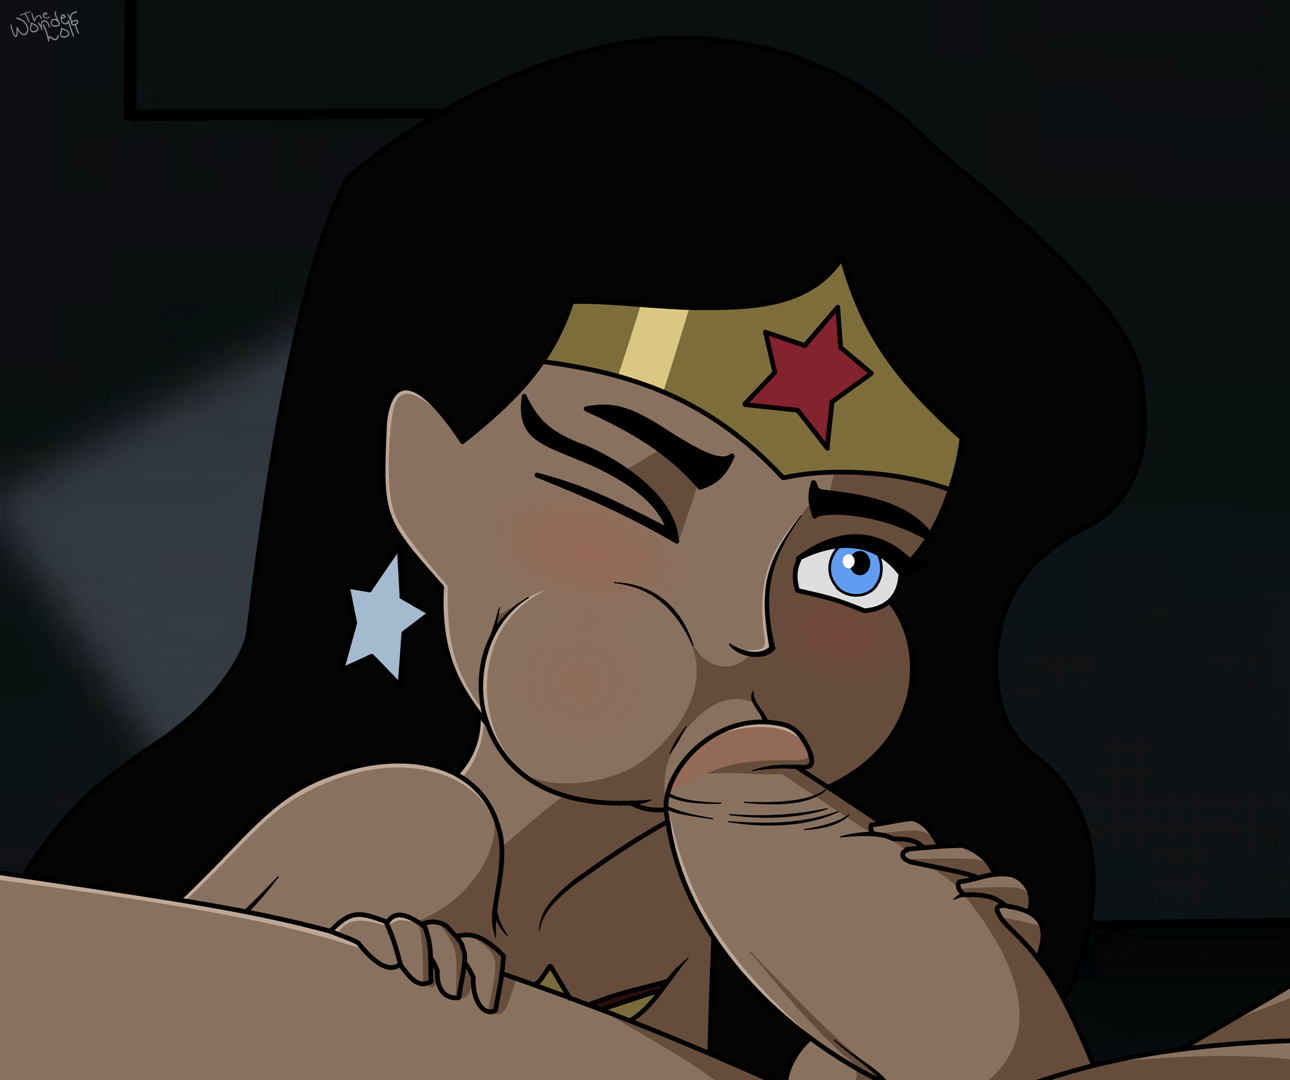 amanda callas recommends Young Wonder Woman Naked